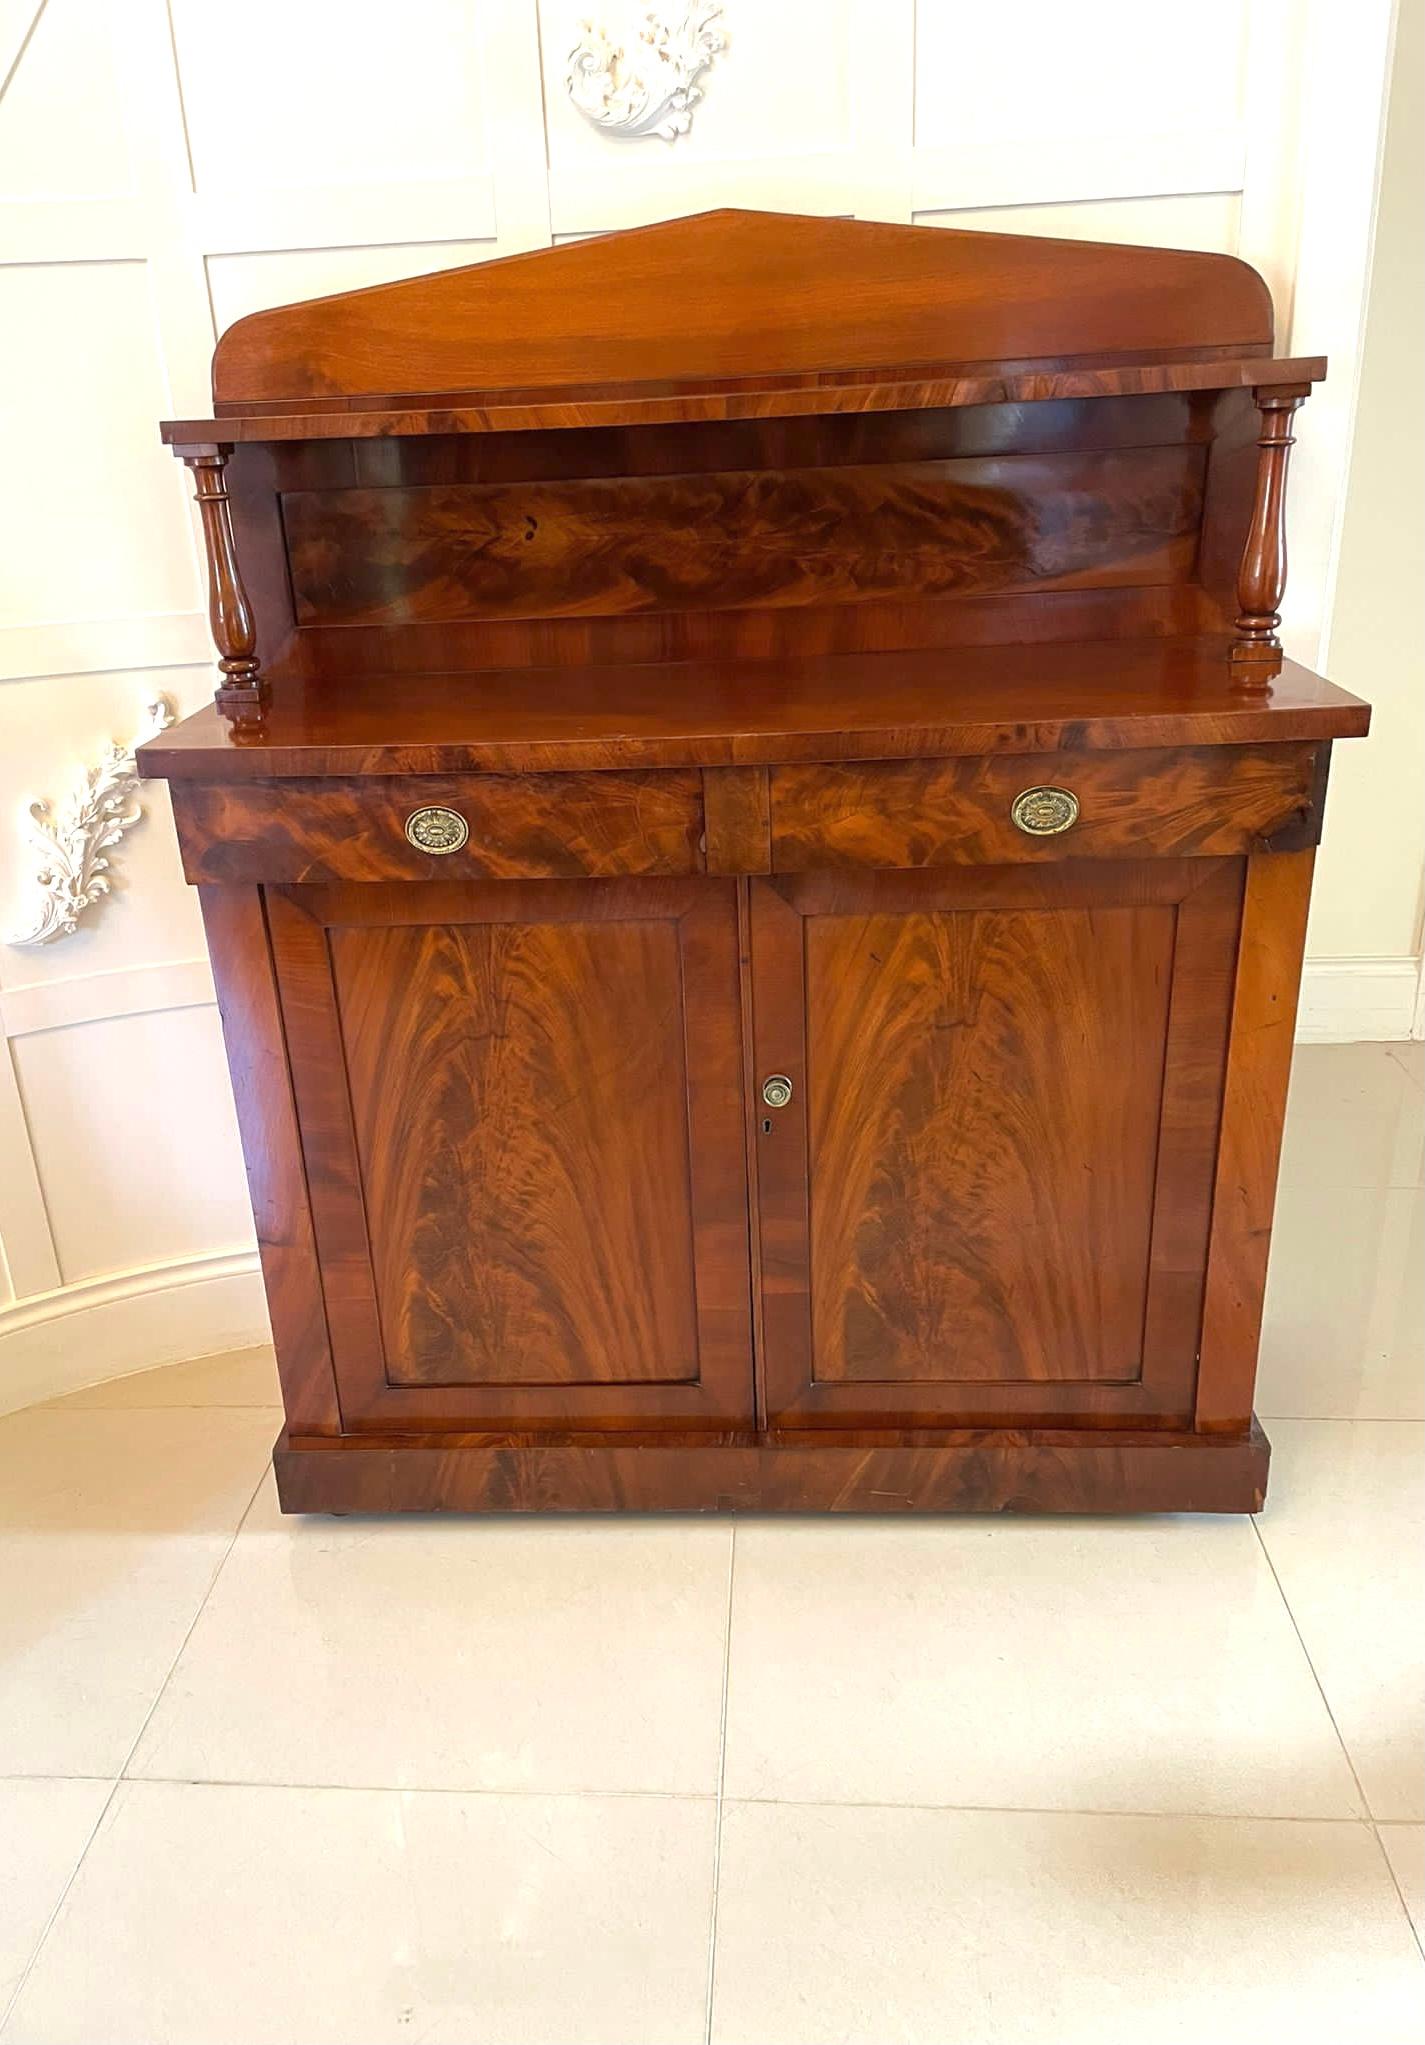 Antique William IV quality figured mahogany sideboard having a quality raised superstructure with a shelf supported by attractive turned columns above a figured mahogany sideboard with two drawers, original ornate brass oval handles, pair of figured